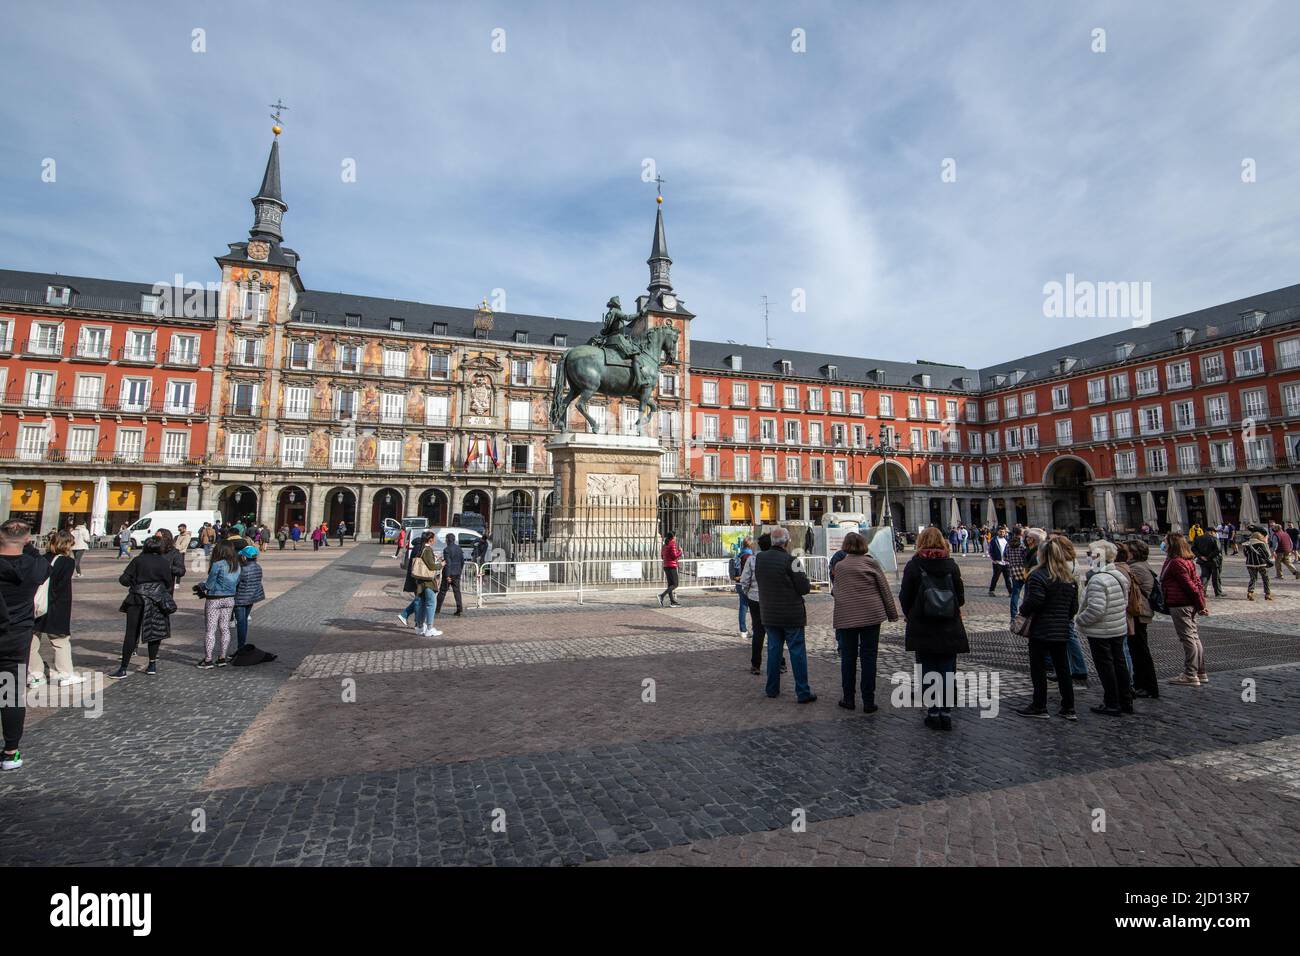 Groups of people sightseeing at the Plaza Mayor, Madrid, Spain Stock Photo